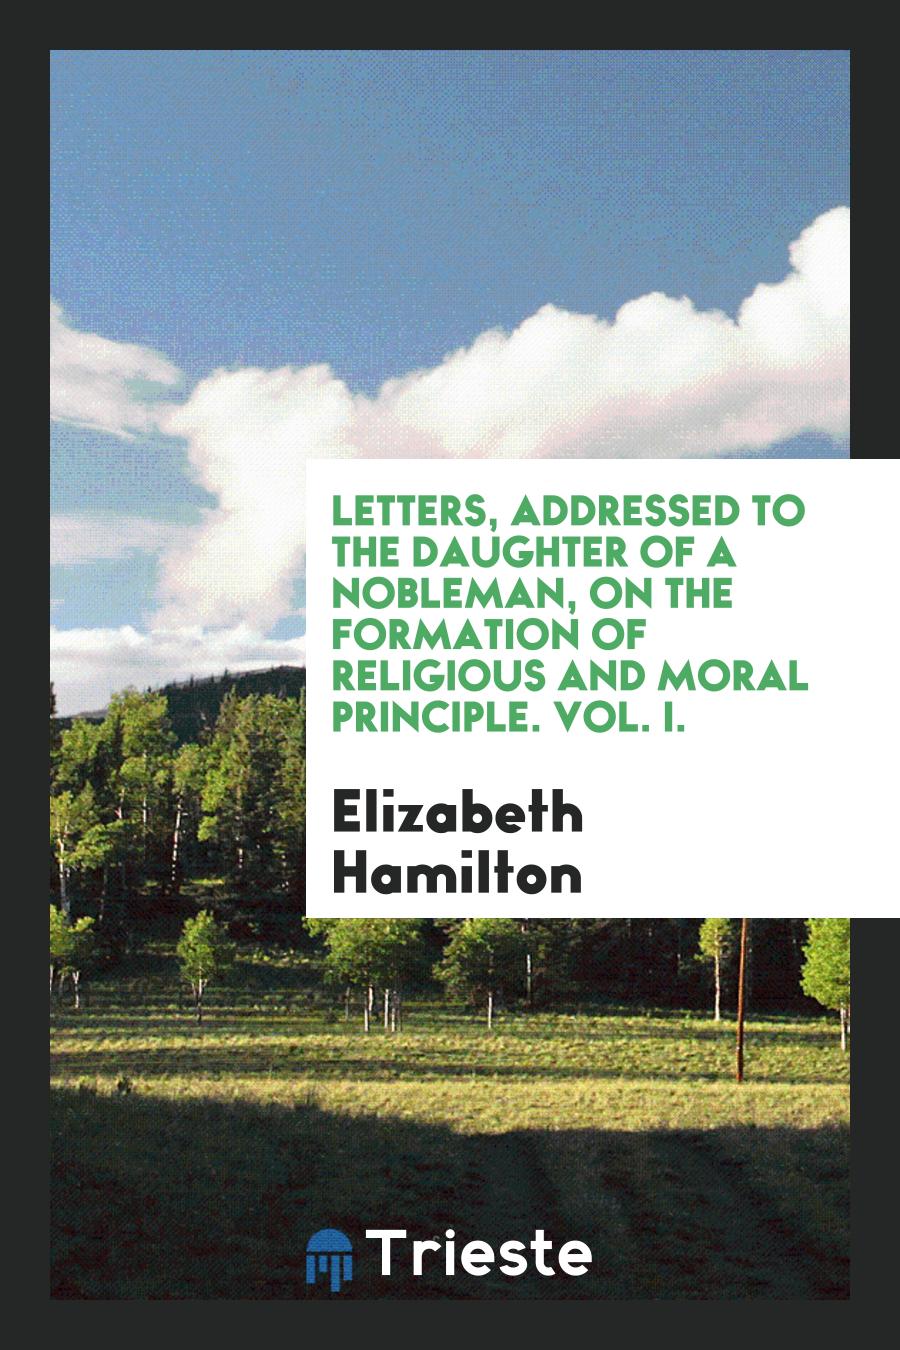 Letters, Addressed to the Daughter of a Nobleman, on the Formation of Religious and Moral Principle. Vol. I.